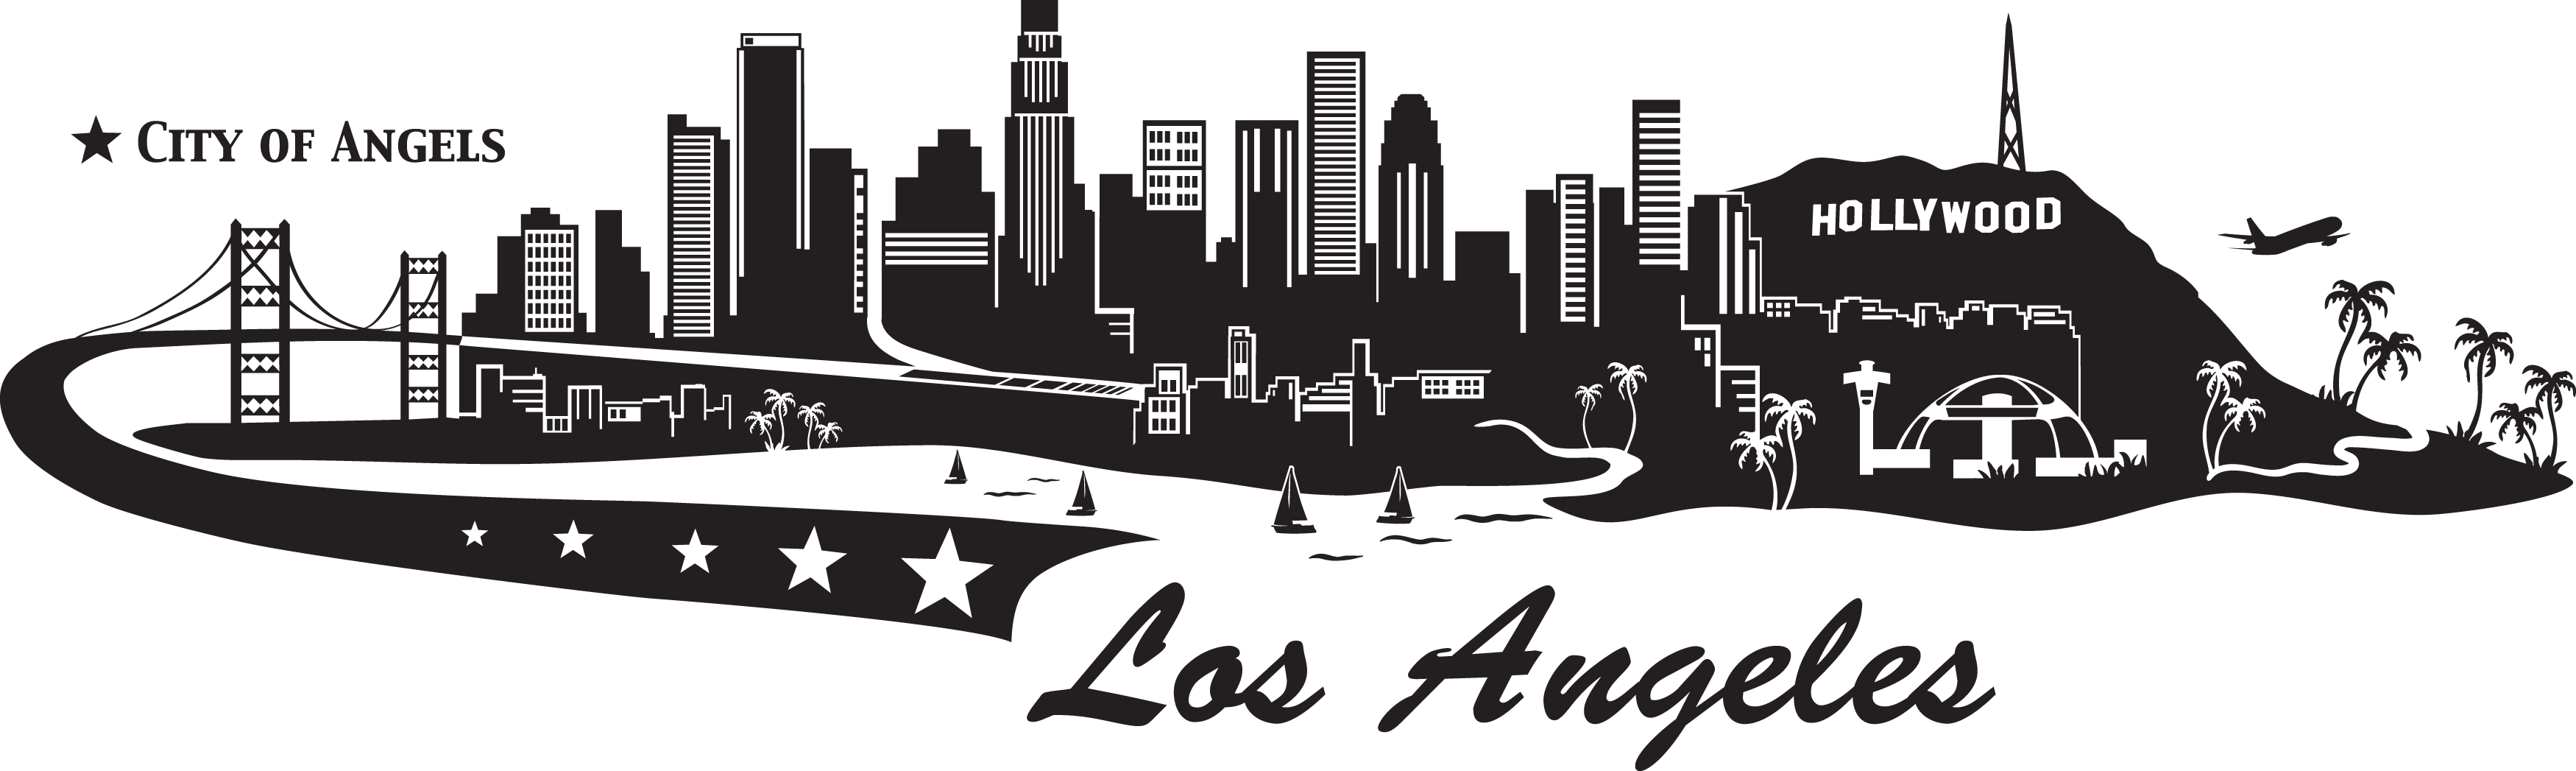 Los Angeles Skyline Decal Wall Decals Style And